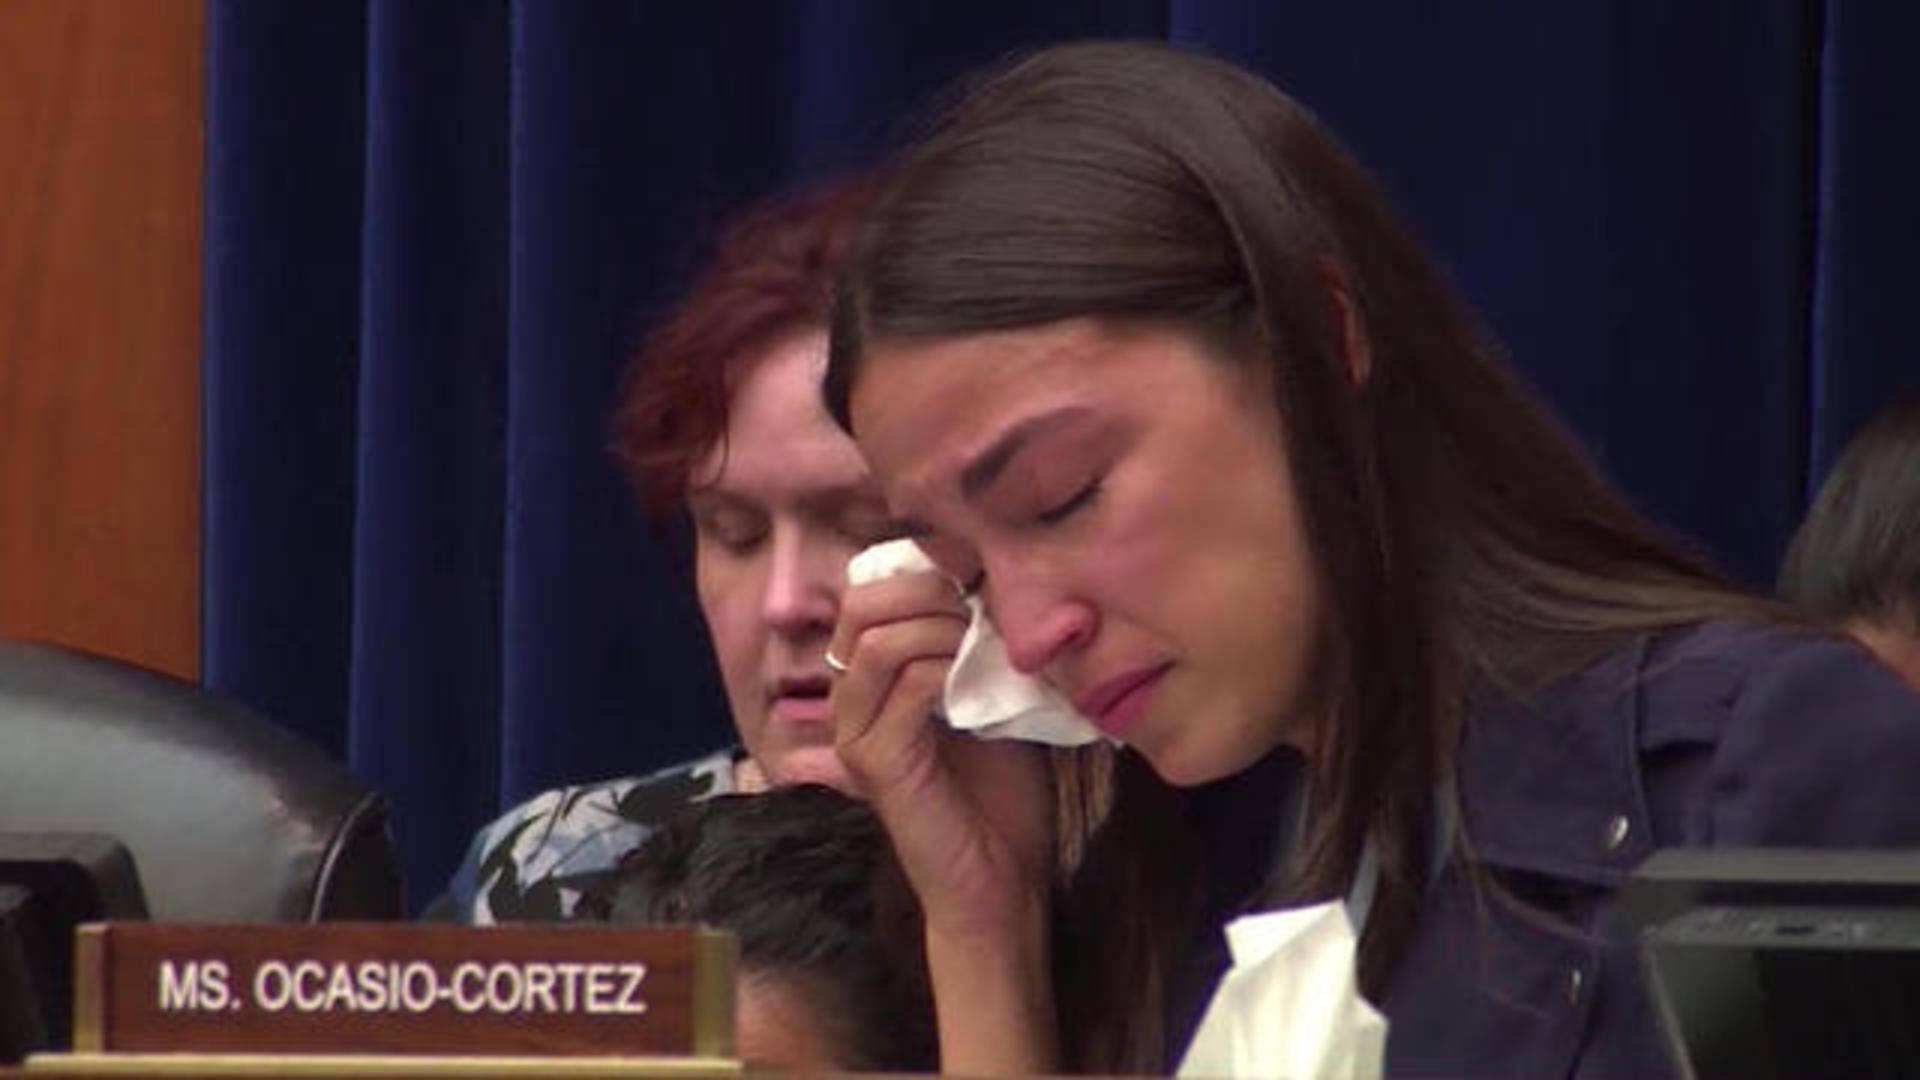 Alexandria Ocasio-Cortez tears up while hearing story of child who died  after being held by ICE - CBS News